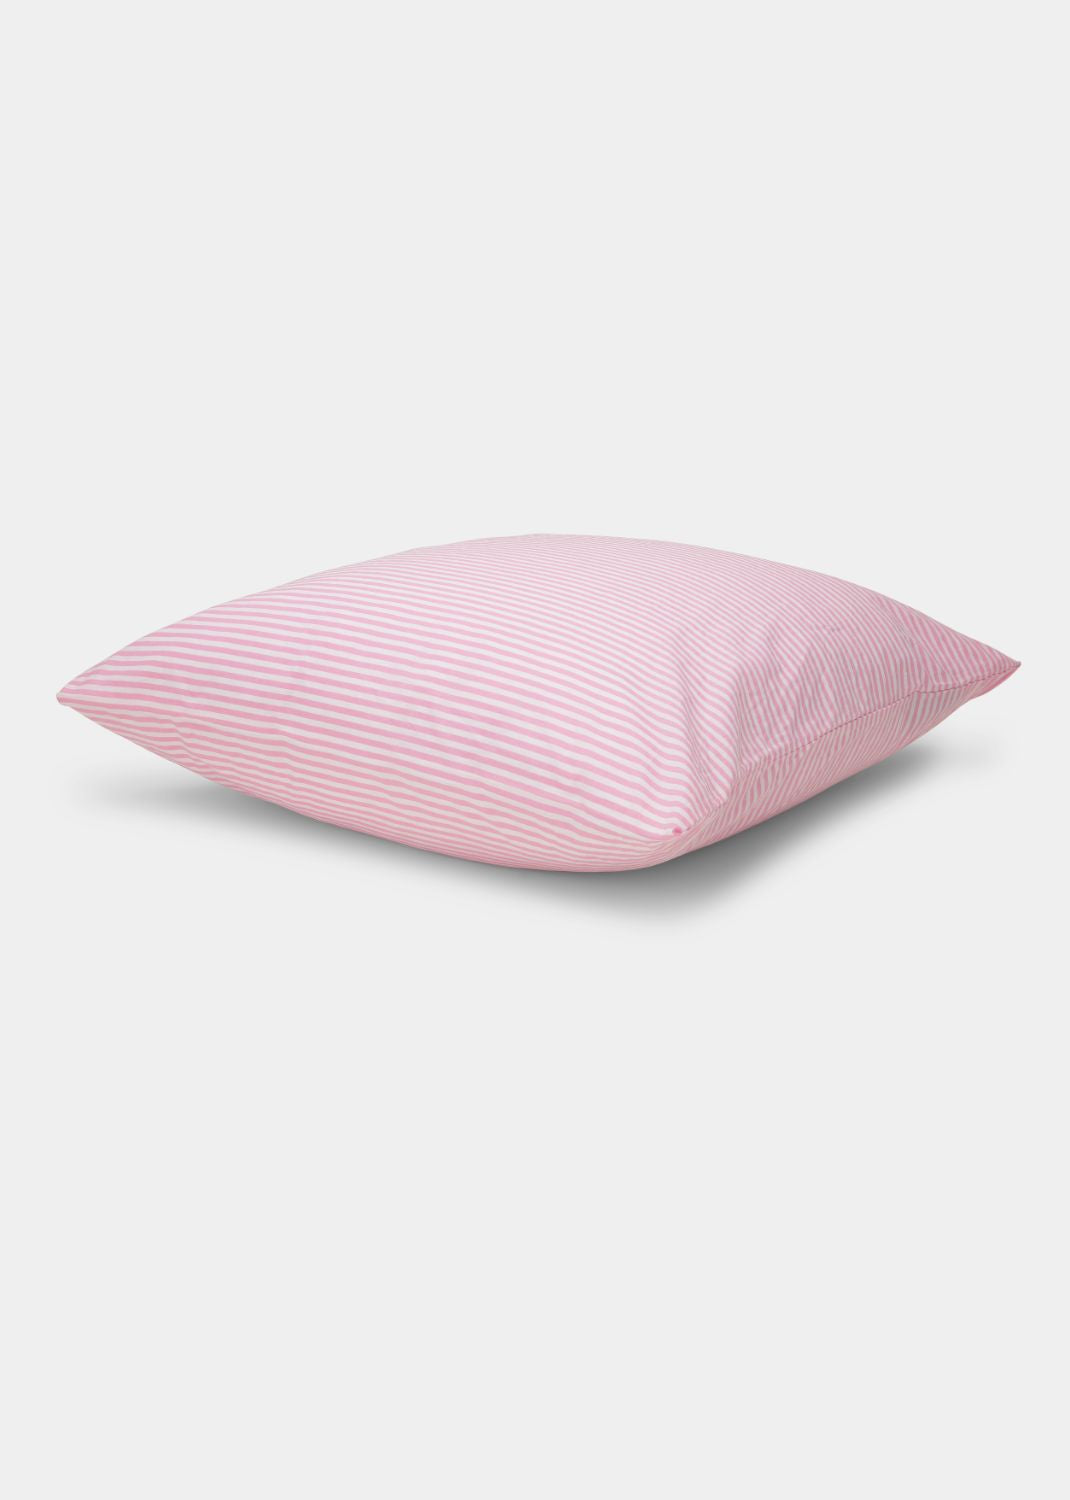 Blank x Sekan - Cotton percale bed set - Pink stripe